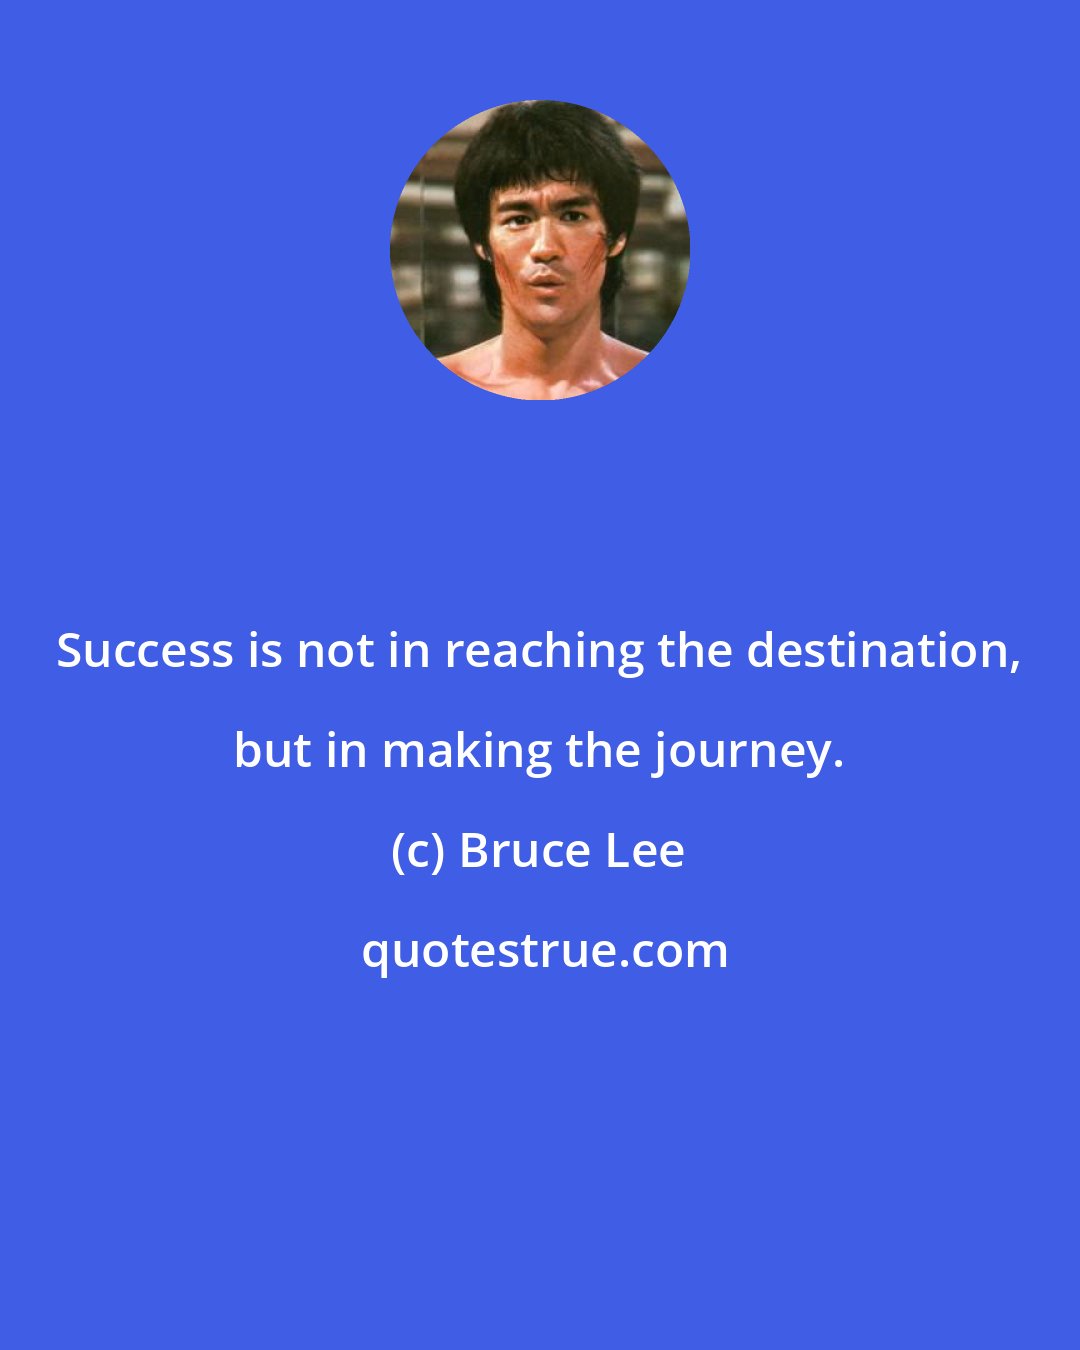 Bruce Lee: Success is not in reaching the destination, but in making the journey.